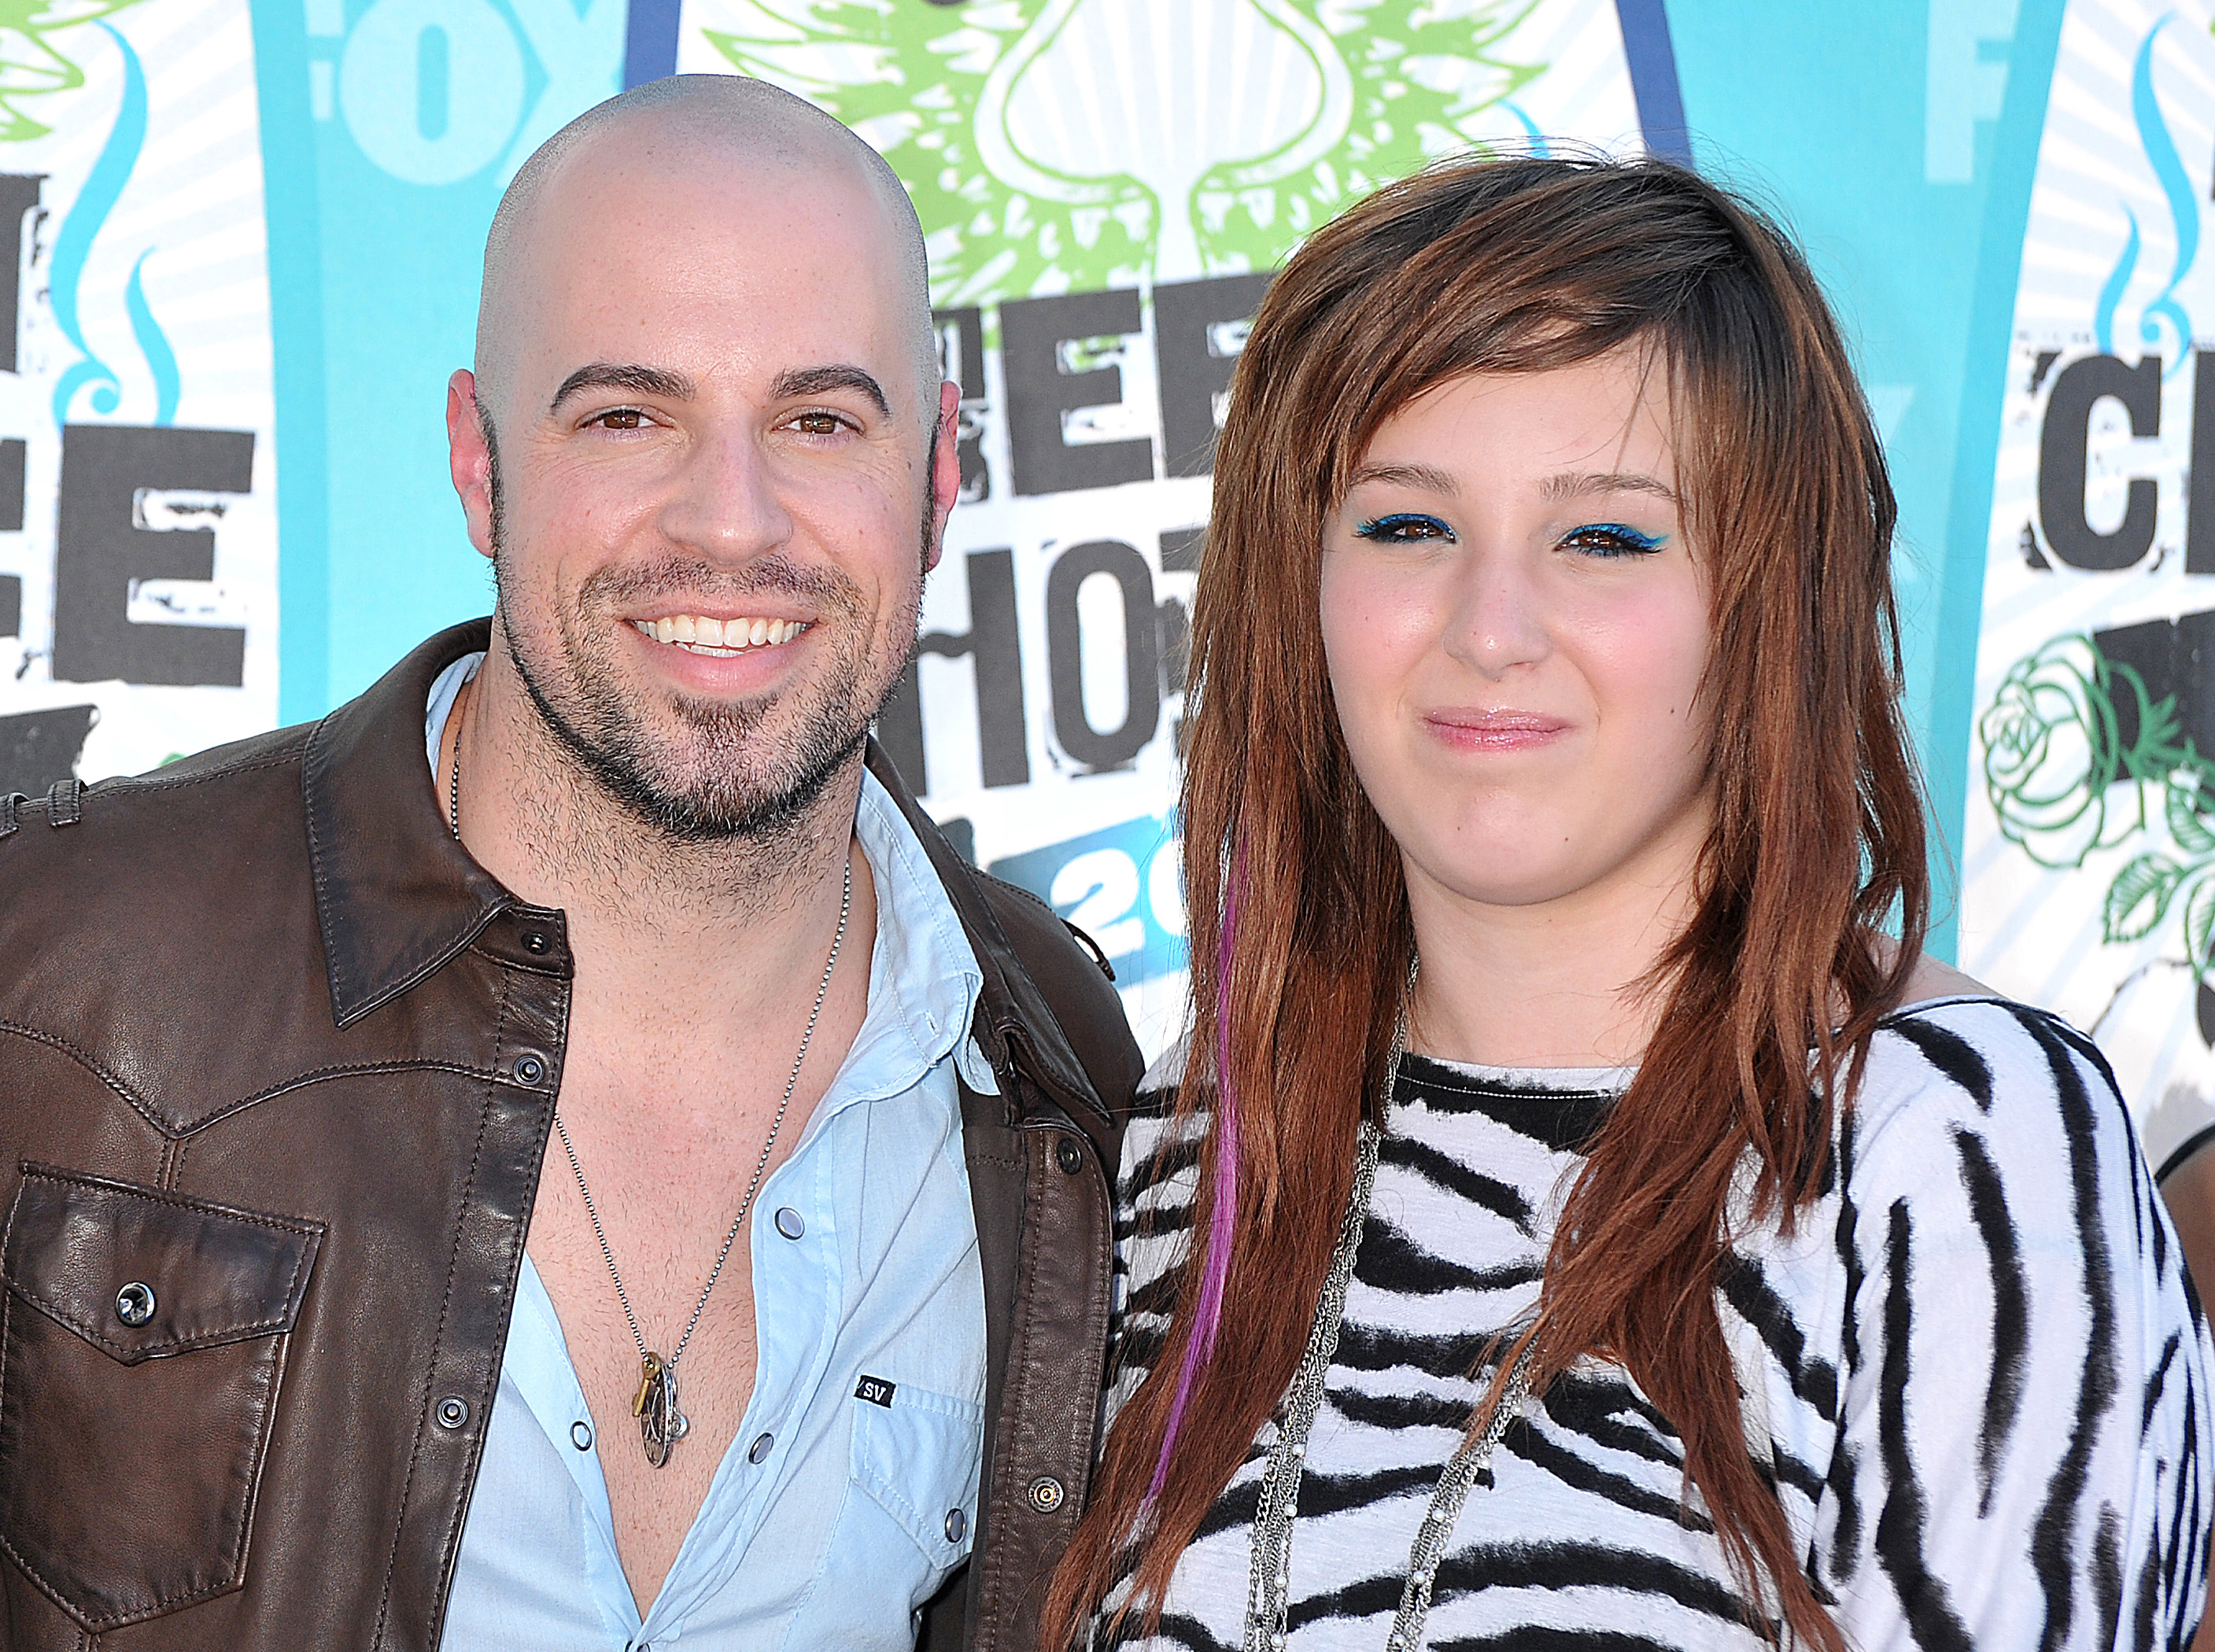 <p>On Nov. 12, 2021, rocker Chris Daughtry's stepdaughter, Hannah, was found dead in her Nashville home by the Nashville Police Department, <a href="https://people.com/music/chris-daughtry-postpones-upcoming-tour-dates-following-sudden-death-of-his-daughter/">People</a> magazine reported. The Grammy-nominated Daughtry frontman, who came to fame on season 5 of "American Idol" and was on tour when the tragic news emerged, immediately returned home to be with his family. (He's seen here with Hannah in 2010.) There was initially conflicting speculation about what happened to Hannah, and in early 2022, Chris and his family confirmed that authorities determined she'd died by suicide while under the influence of narcotics. "I am absolutely devastated and heartbroken," Chris wrote alongside a <a href="https://www.instagram.com/p/CWOiIyHv7Xb/">photo</a> of Hannah in the aftermath of her death. "I just recently lost my mother to cancer but I was blessed with the chance to say goodbye and I was processing it privately. We never got to say goodbye to our precious Hannah and it's another huge hit to our family. Thank you all for your kind words and condolences. They are truly felt and appreciated. I am now taking time be present with my family as we attempt to heal from this devastating loss," he continued, adding, "Hannah, I love you. I miss you. I wish I could hold you. This hurts so deeply." Deanna -- Chris's wife of more than two decades years -- also took to social media to grieve, writing alongside a <a href="https://www.instagram.com/p/CWN__vOgao5/">slideshow</a> of photos of her daughter, "My first born. I love you endlessly Hannah. Our family would like to thank you all for the outpouring of love as we grieve the loss of our daughter Hannah." Hannah and adult brother Griffin are Deanna's children from a previous marriage; Chris and Deanna are also parents to twins Adalynn and Noah.</p>